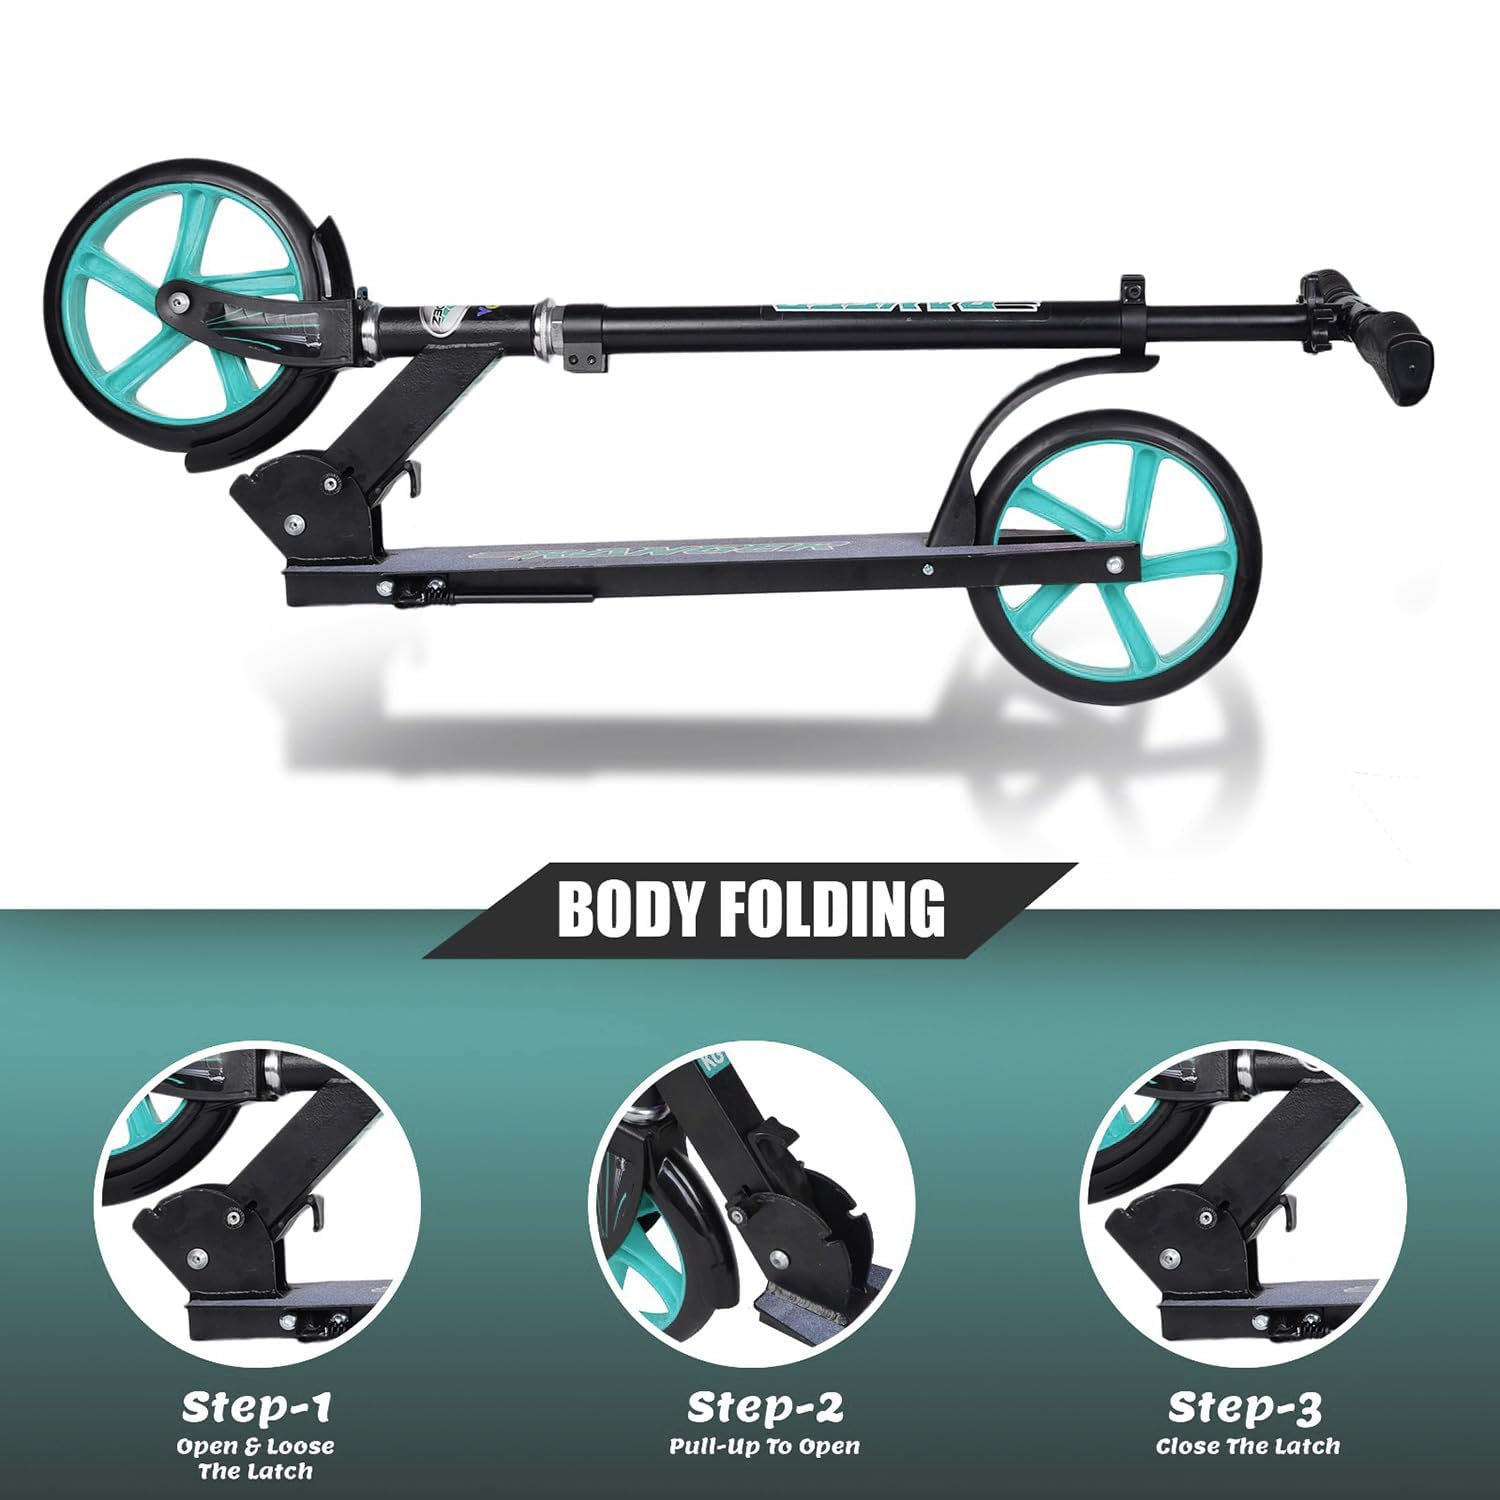 Braintastic Folding Kick Scooter Light Weight Made with Aeronautical Grade Aluminum Alloy with 3 Adjustment Levels Big 200 mm Wheels Scooters with Carry Strap for Kids